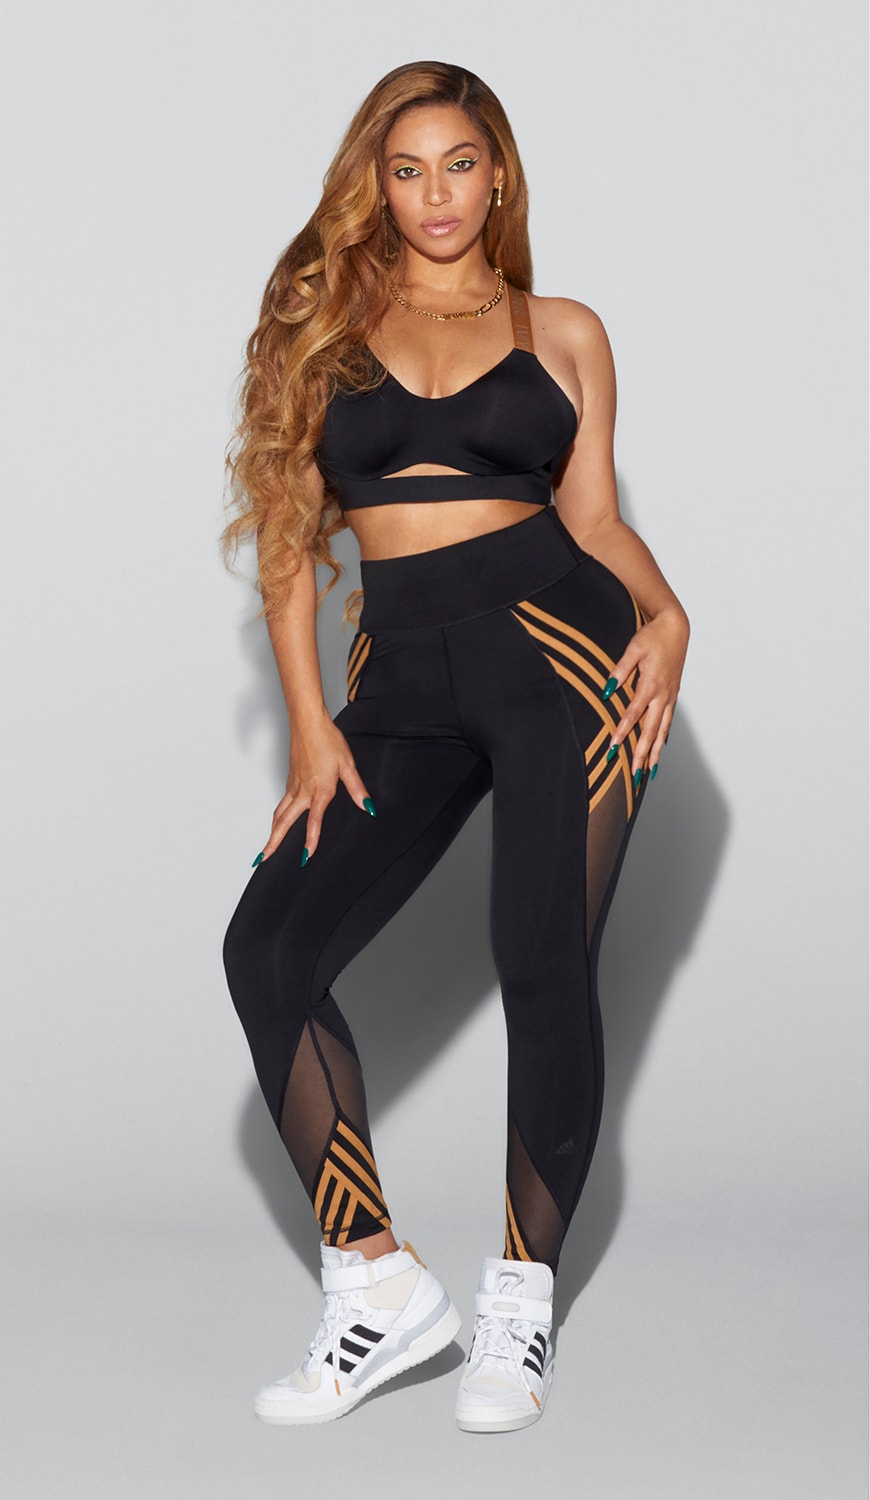 A picture of Beyoncé wearing a crop top and leggings from the new Ivy Park x adidas Drip 2.2 collection | ASOS Style Feed